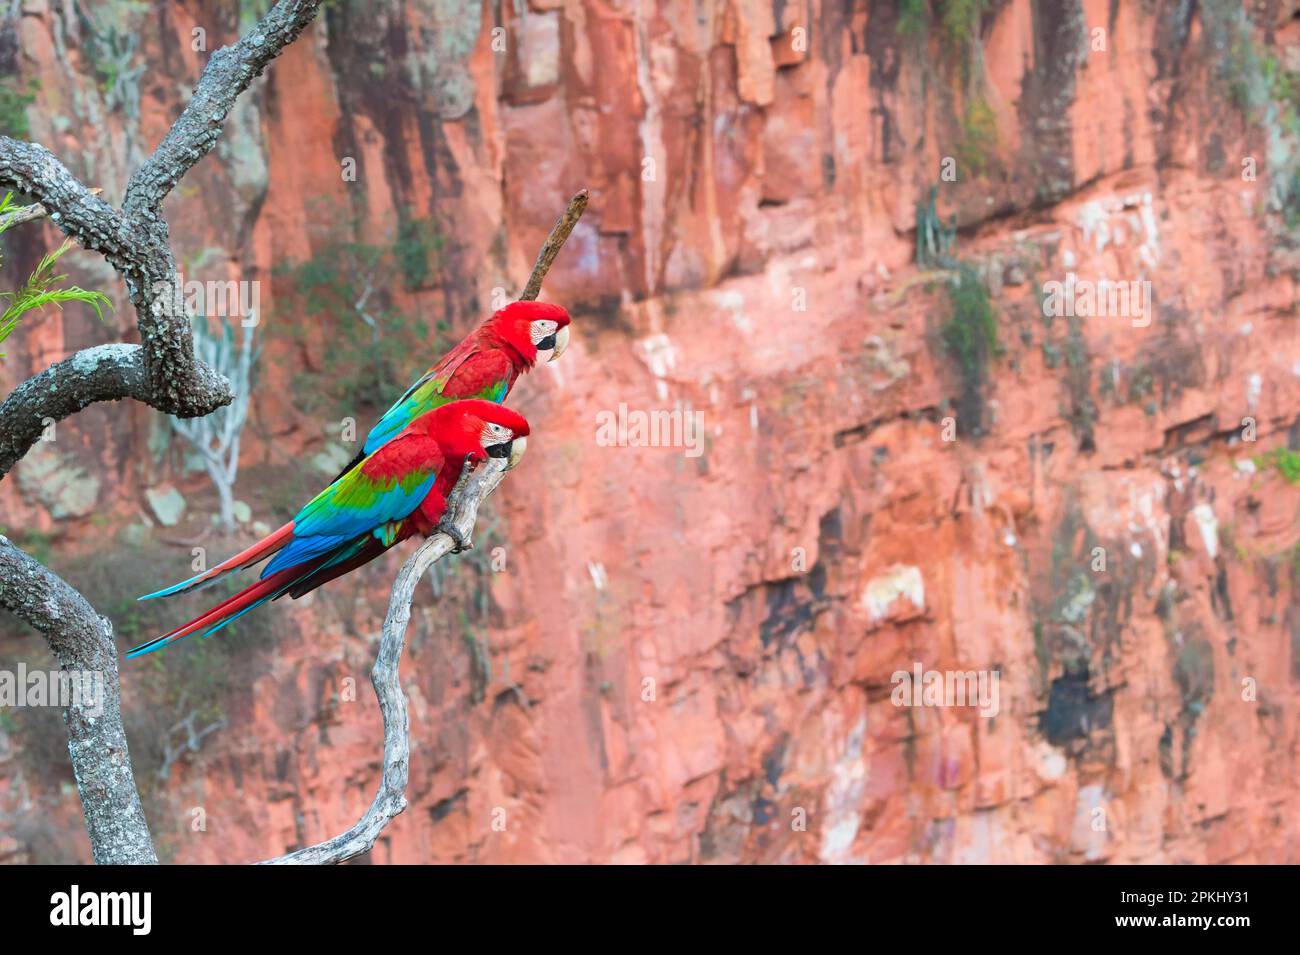 Red and red-and-green macaw (Ara chloropterus) on a branch in Buraco das Araras, Mato Grosso do Sul, Brazil Stock Photo